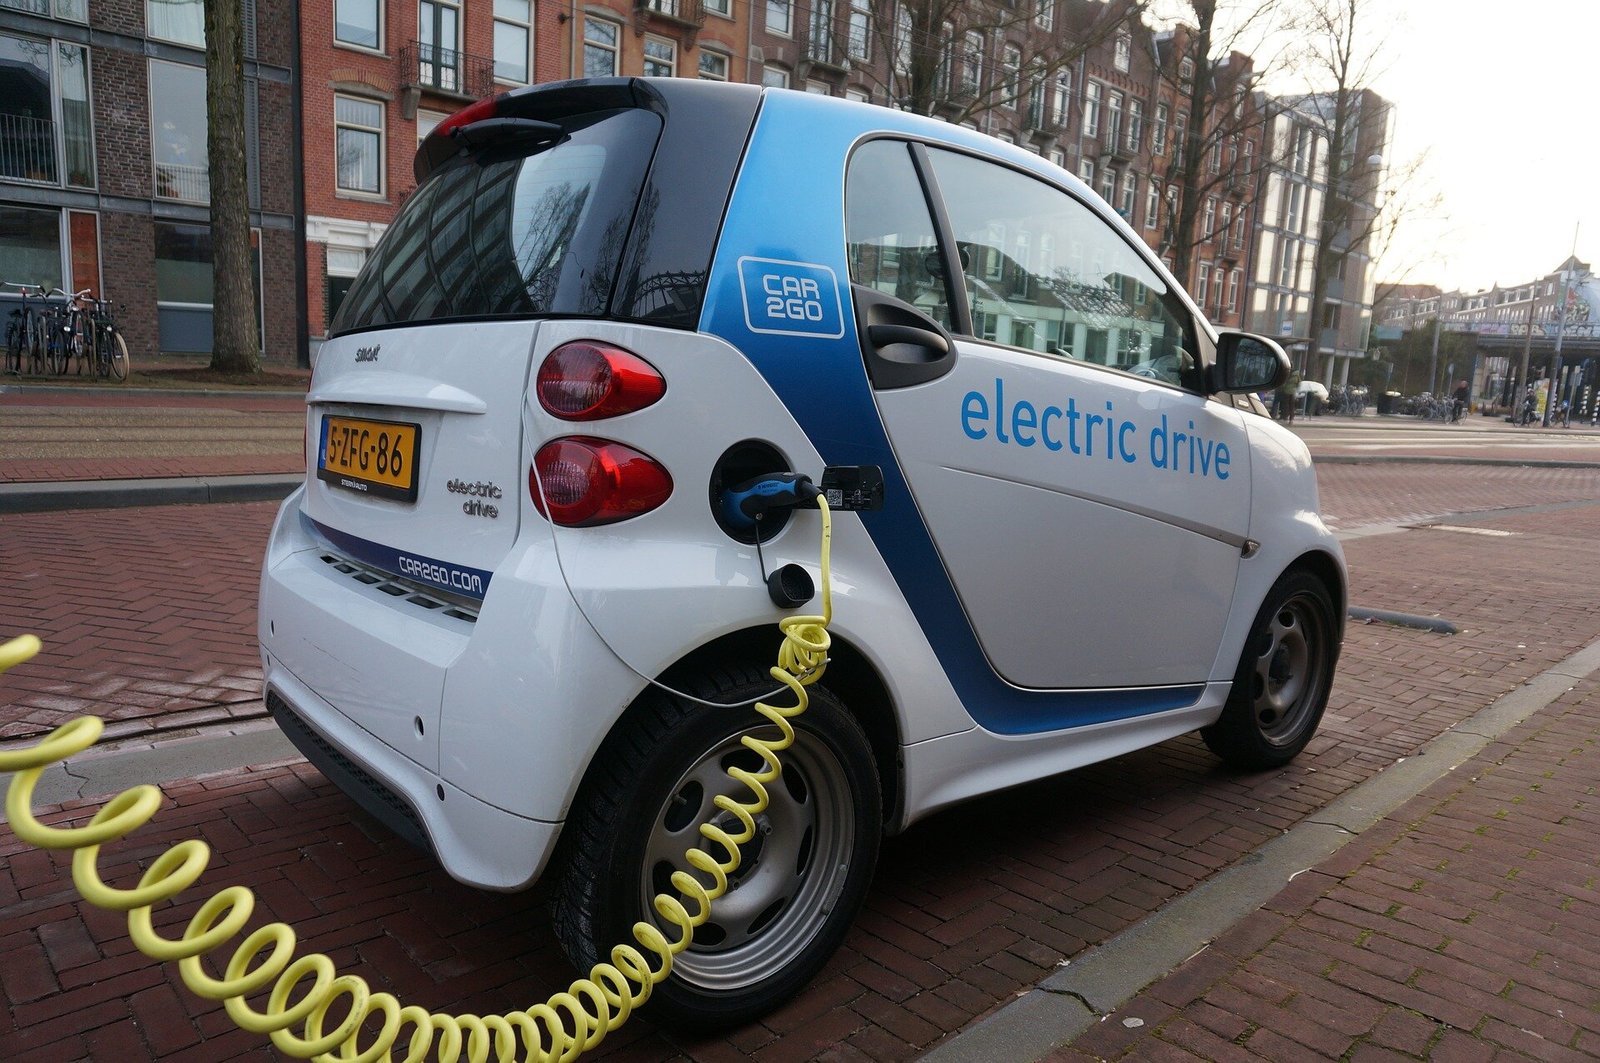 Pedestrians may be twice as likely to be hit by electric/hybrid cars as petrol/diesel ones